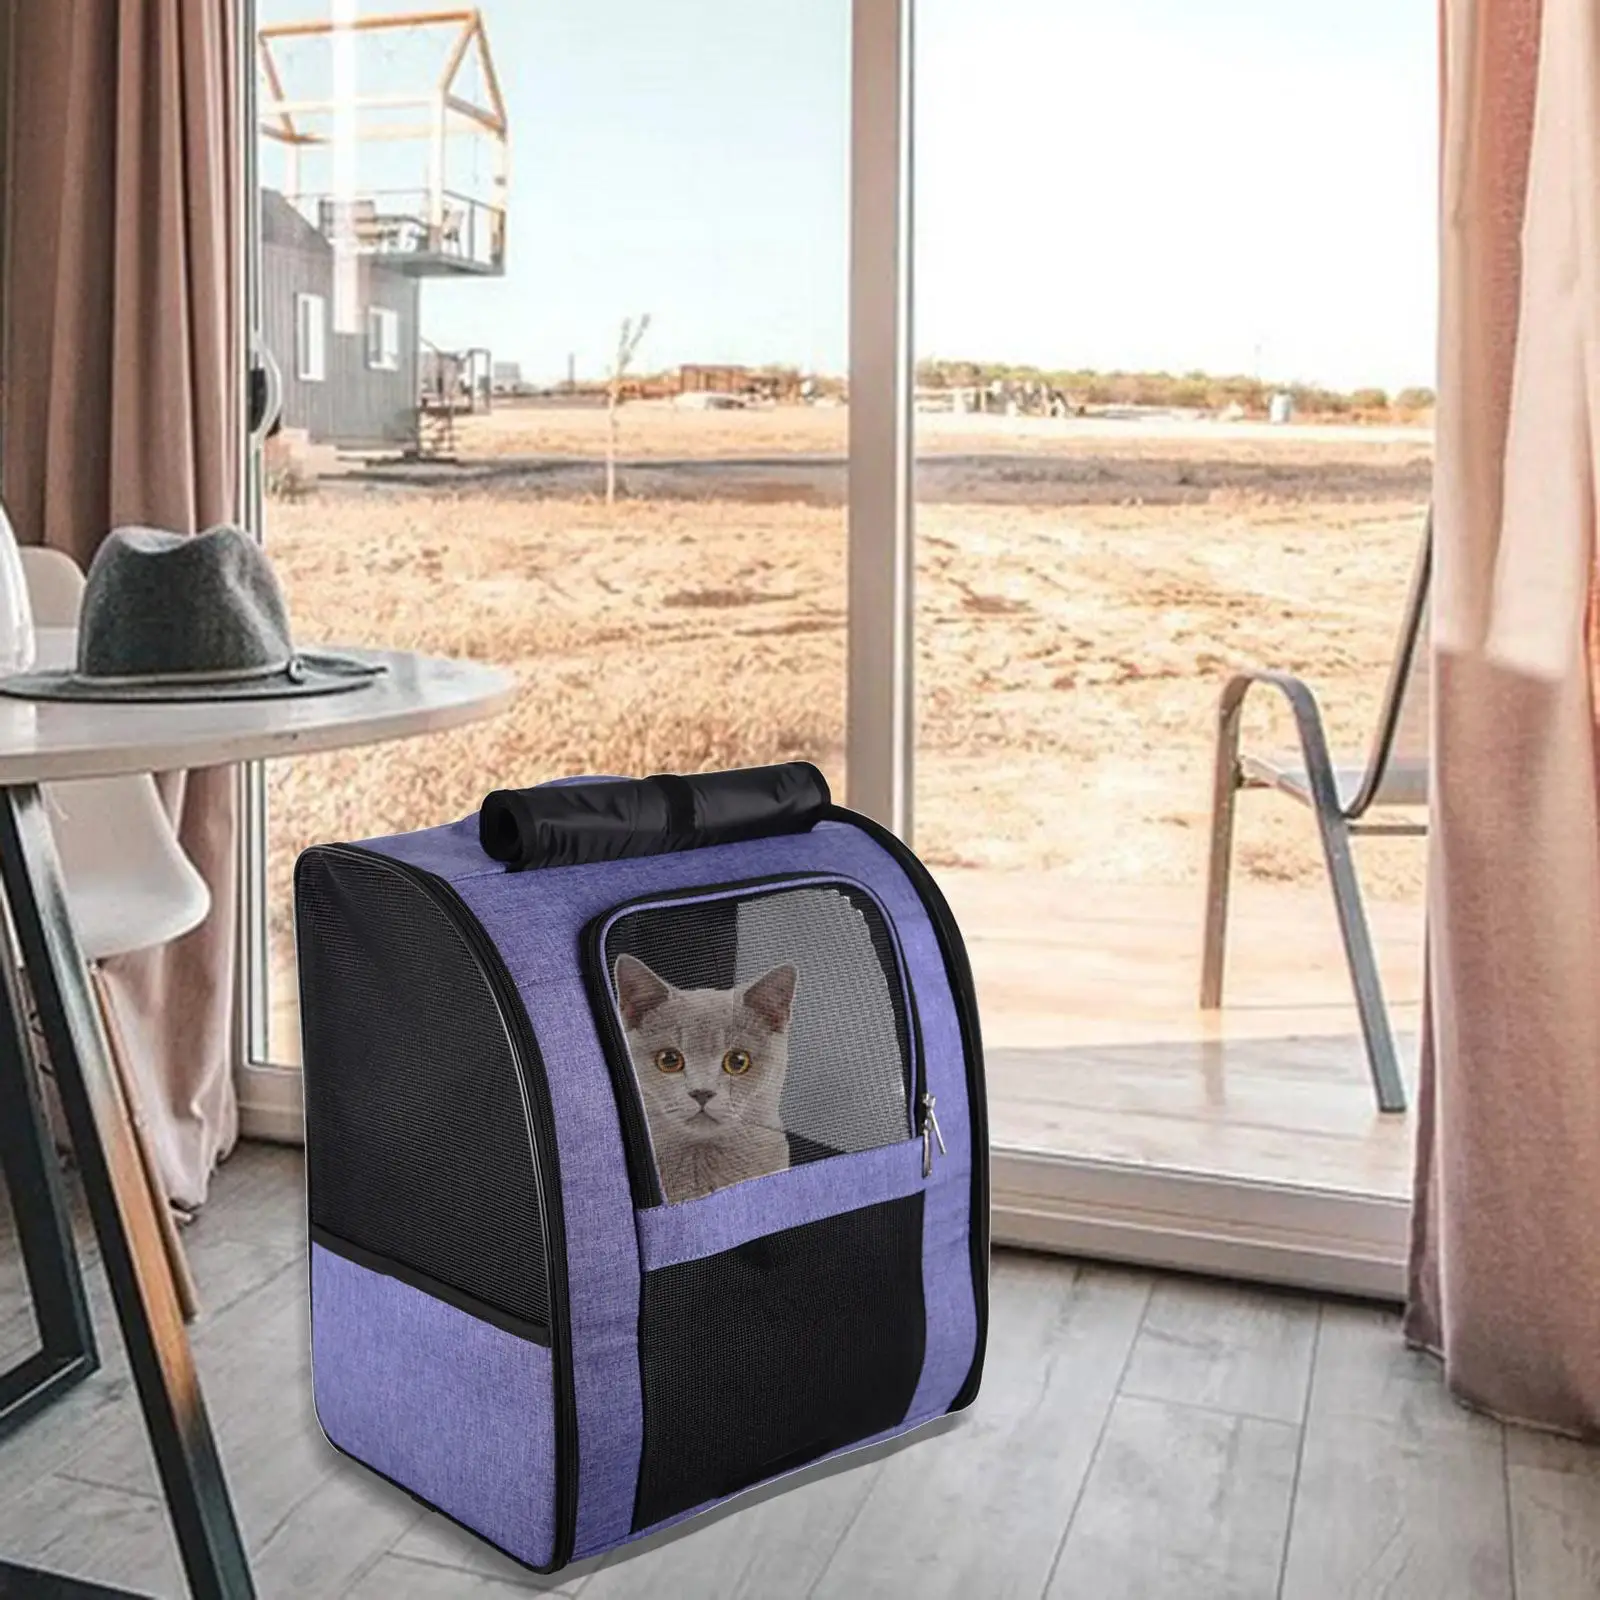 Oxford Cloth Breathable Mesh Folding Pet Dog Cat Carrier Backpack Kitten Outdoor Bag with Shade Cloth Adjustable Sholder Strap